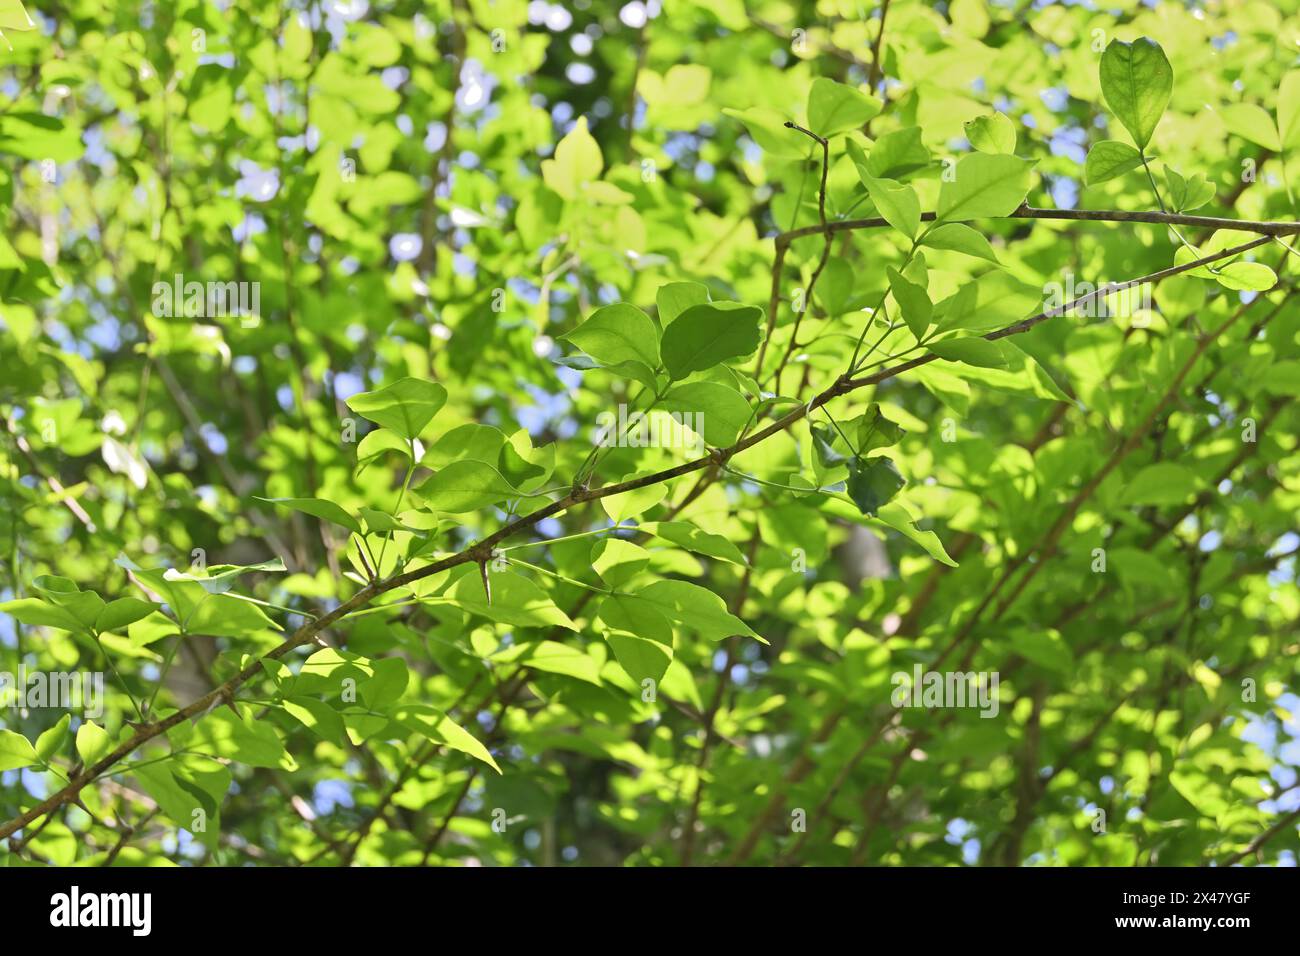 A view of a golden apple tree twig (Aegle marmelos) with bright green leaves in the background due to exposure to sunlight. Stock Photo